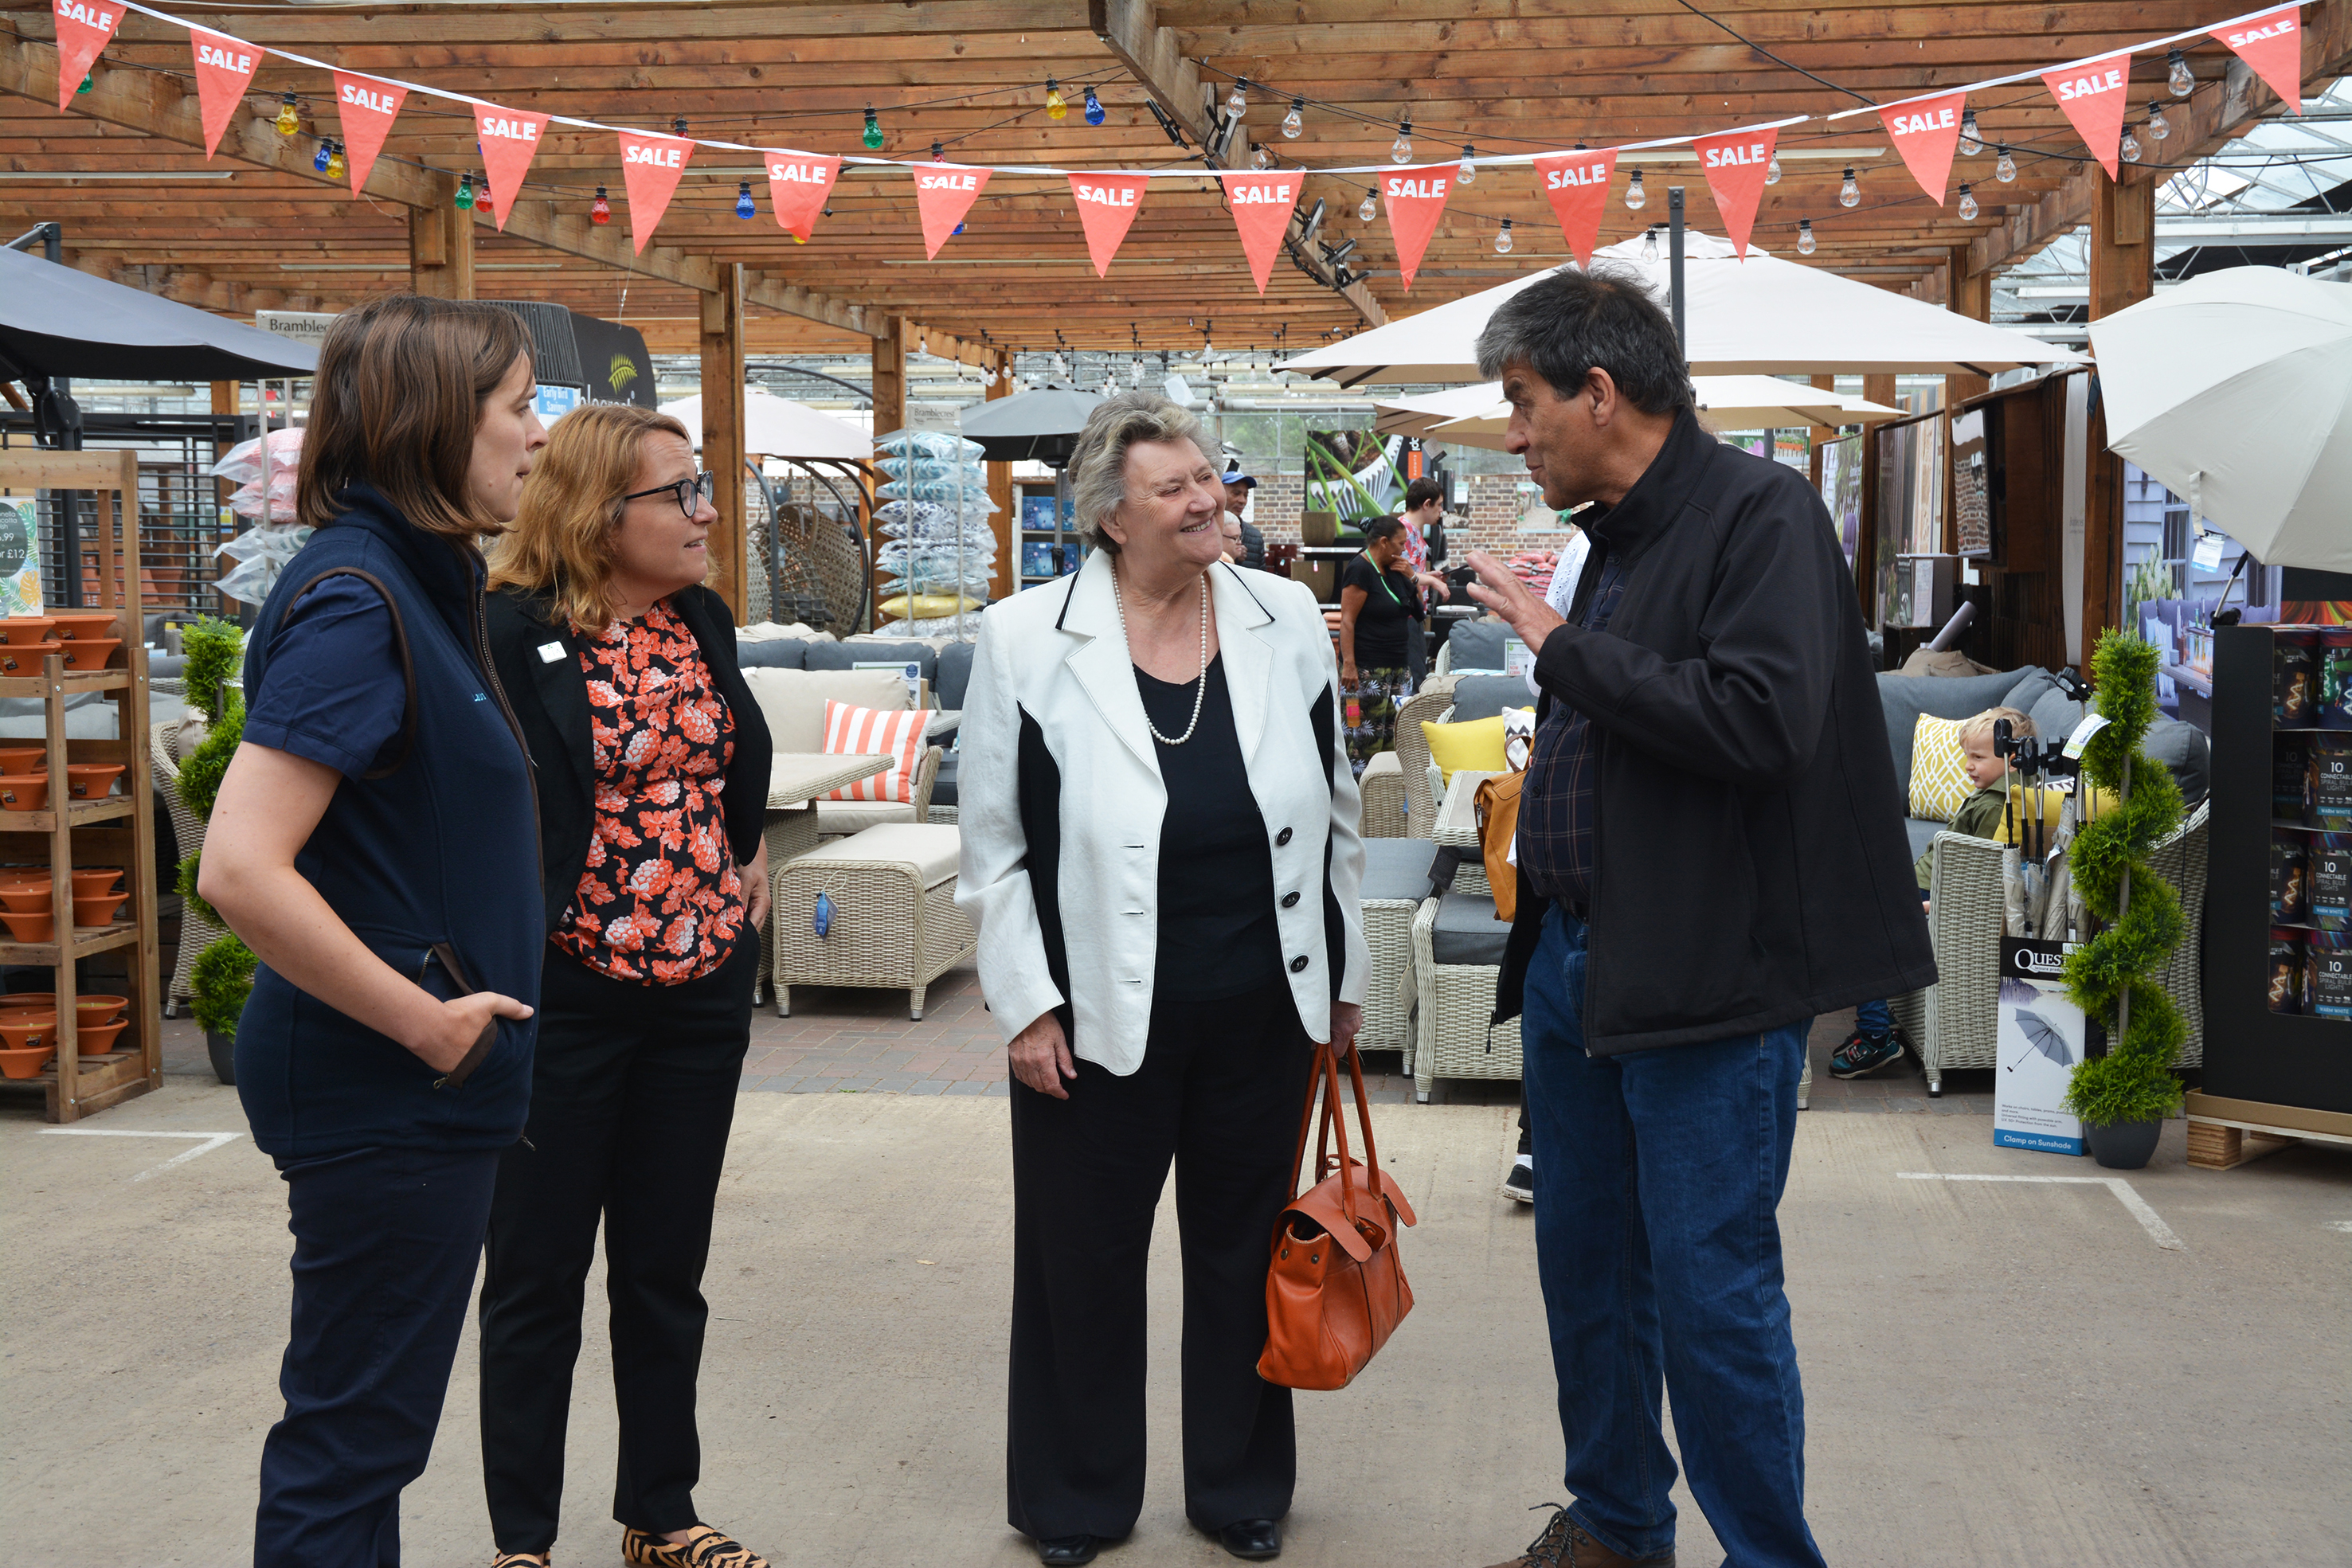 L-R Laura Jackson, Jennifer Pheasey, Heather Wheeler MP and John Jackson standing in a garden centre in front of a furniture display